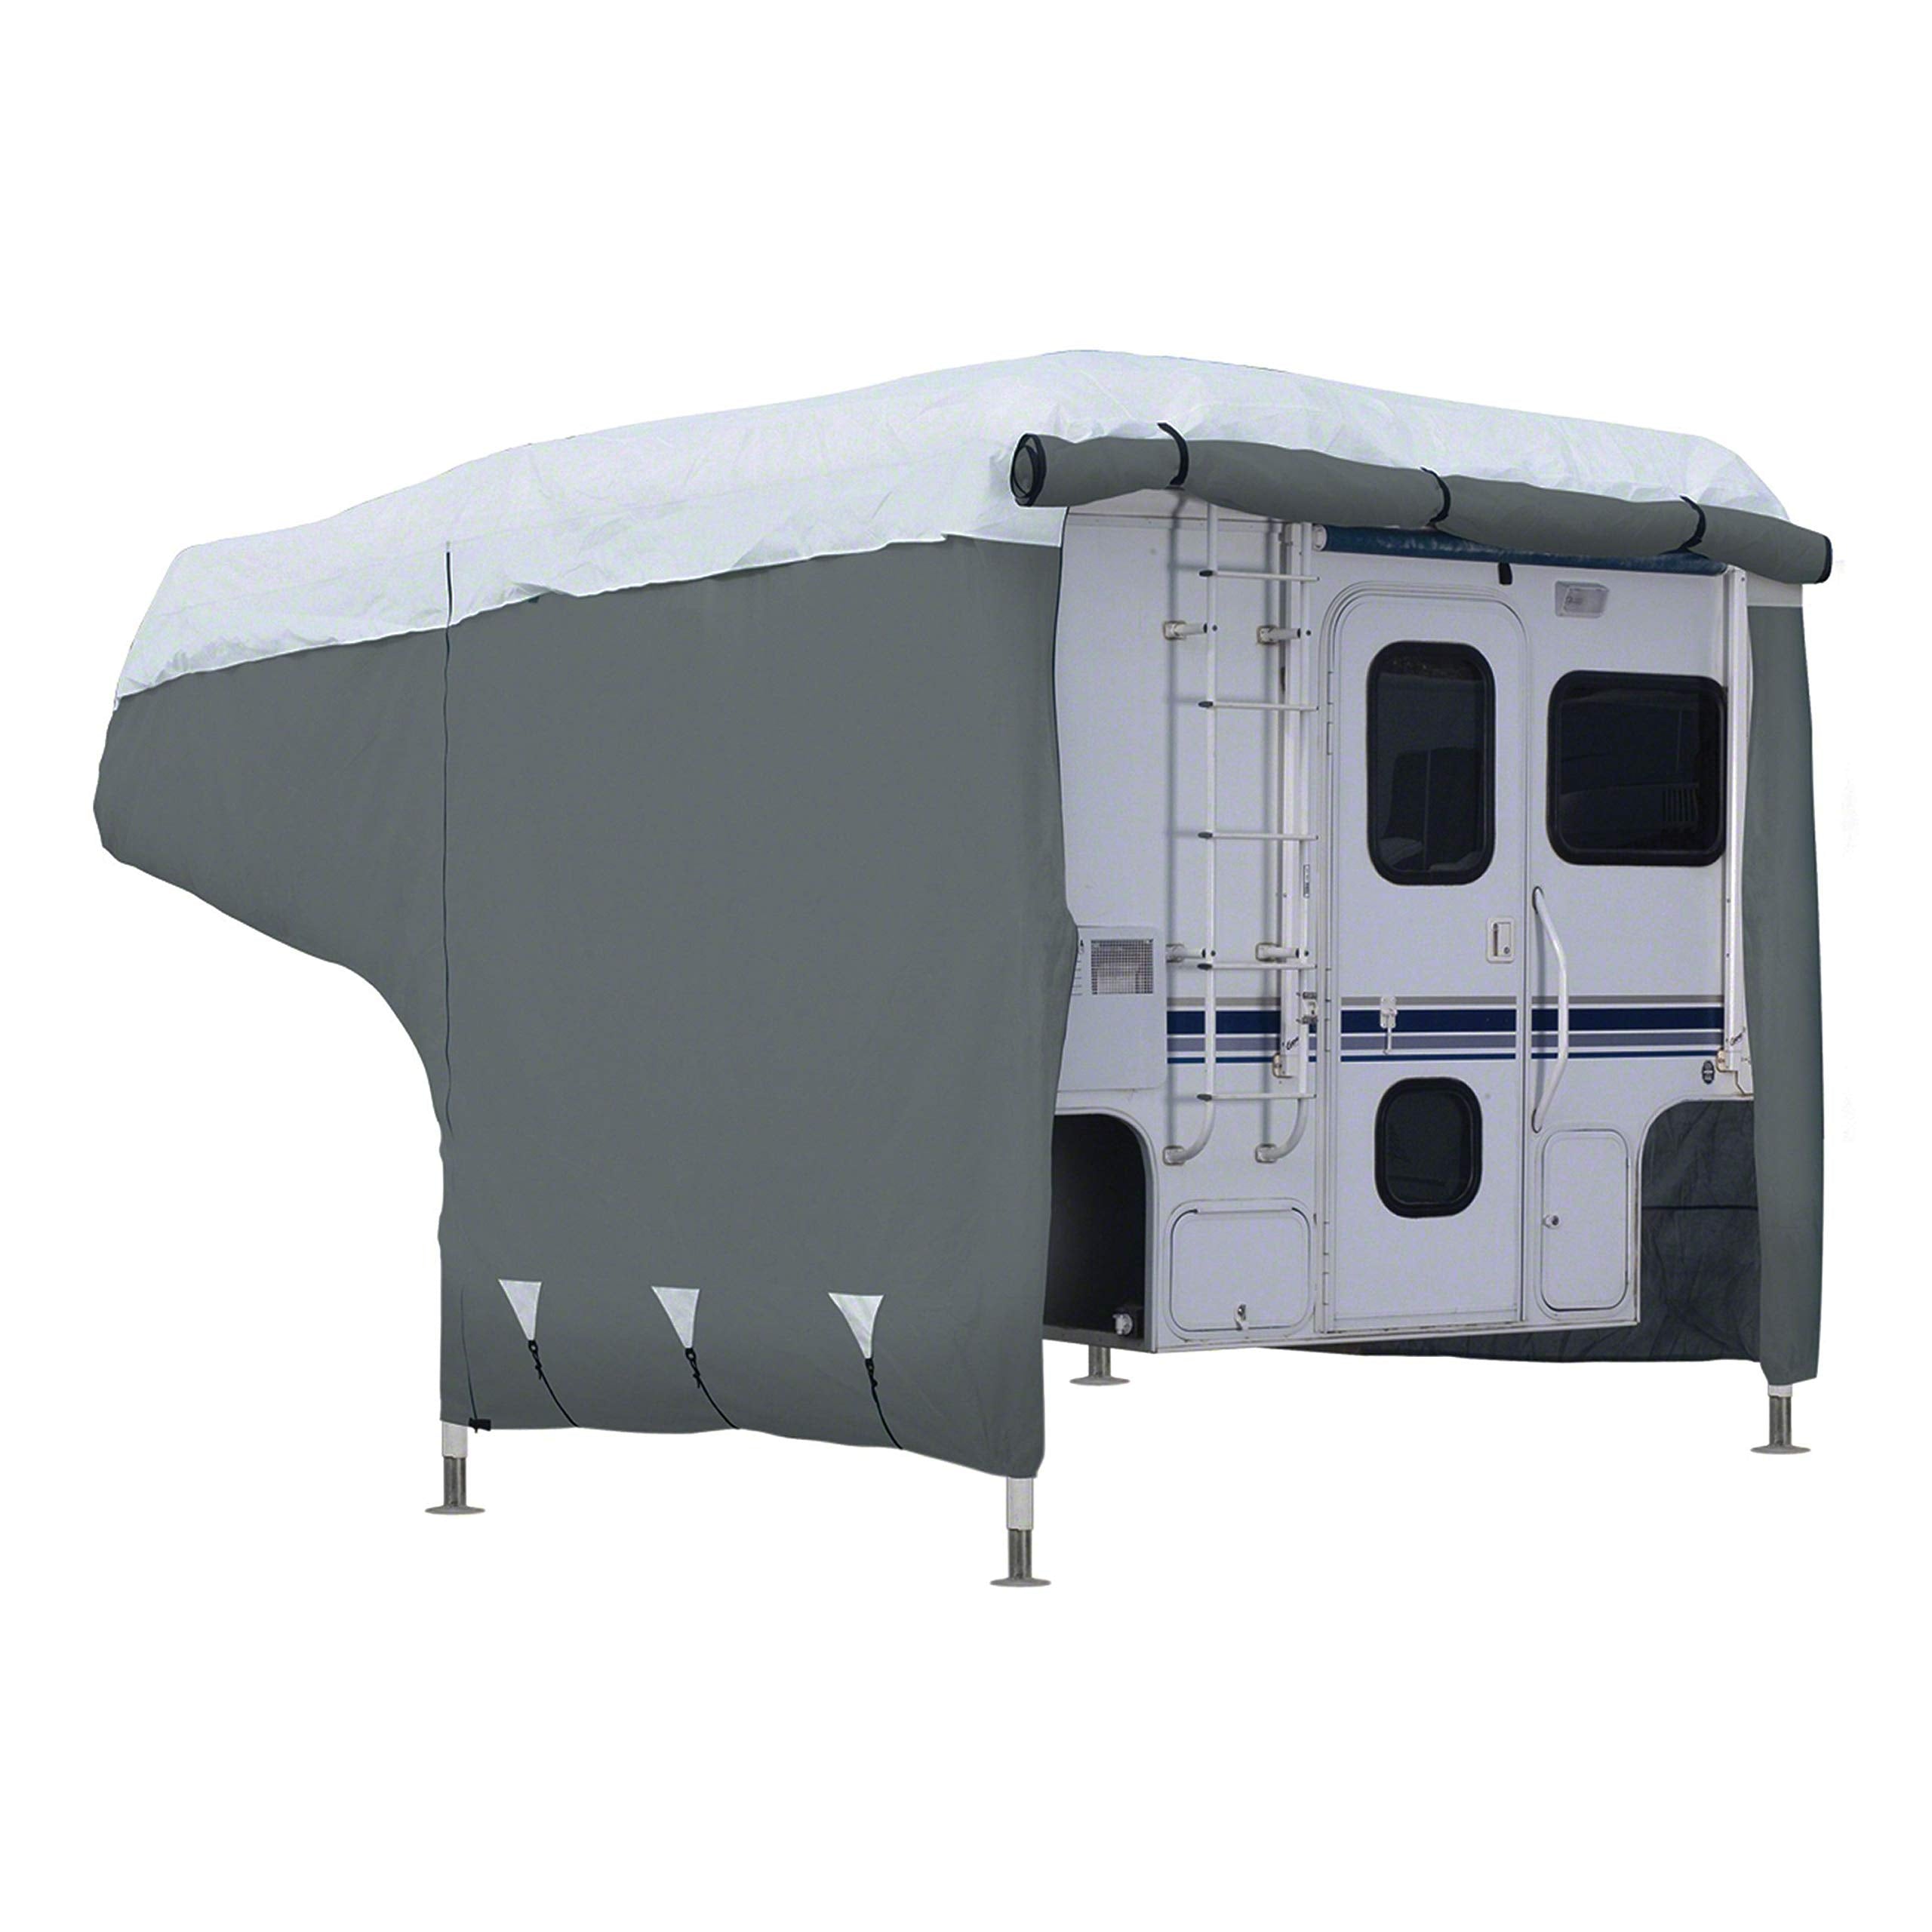 Classic Accessories OverDrive PolyPRO 3 Deluxe Camper Cover, Fits 8' - 10'